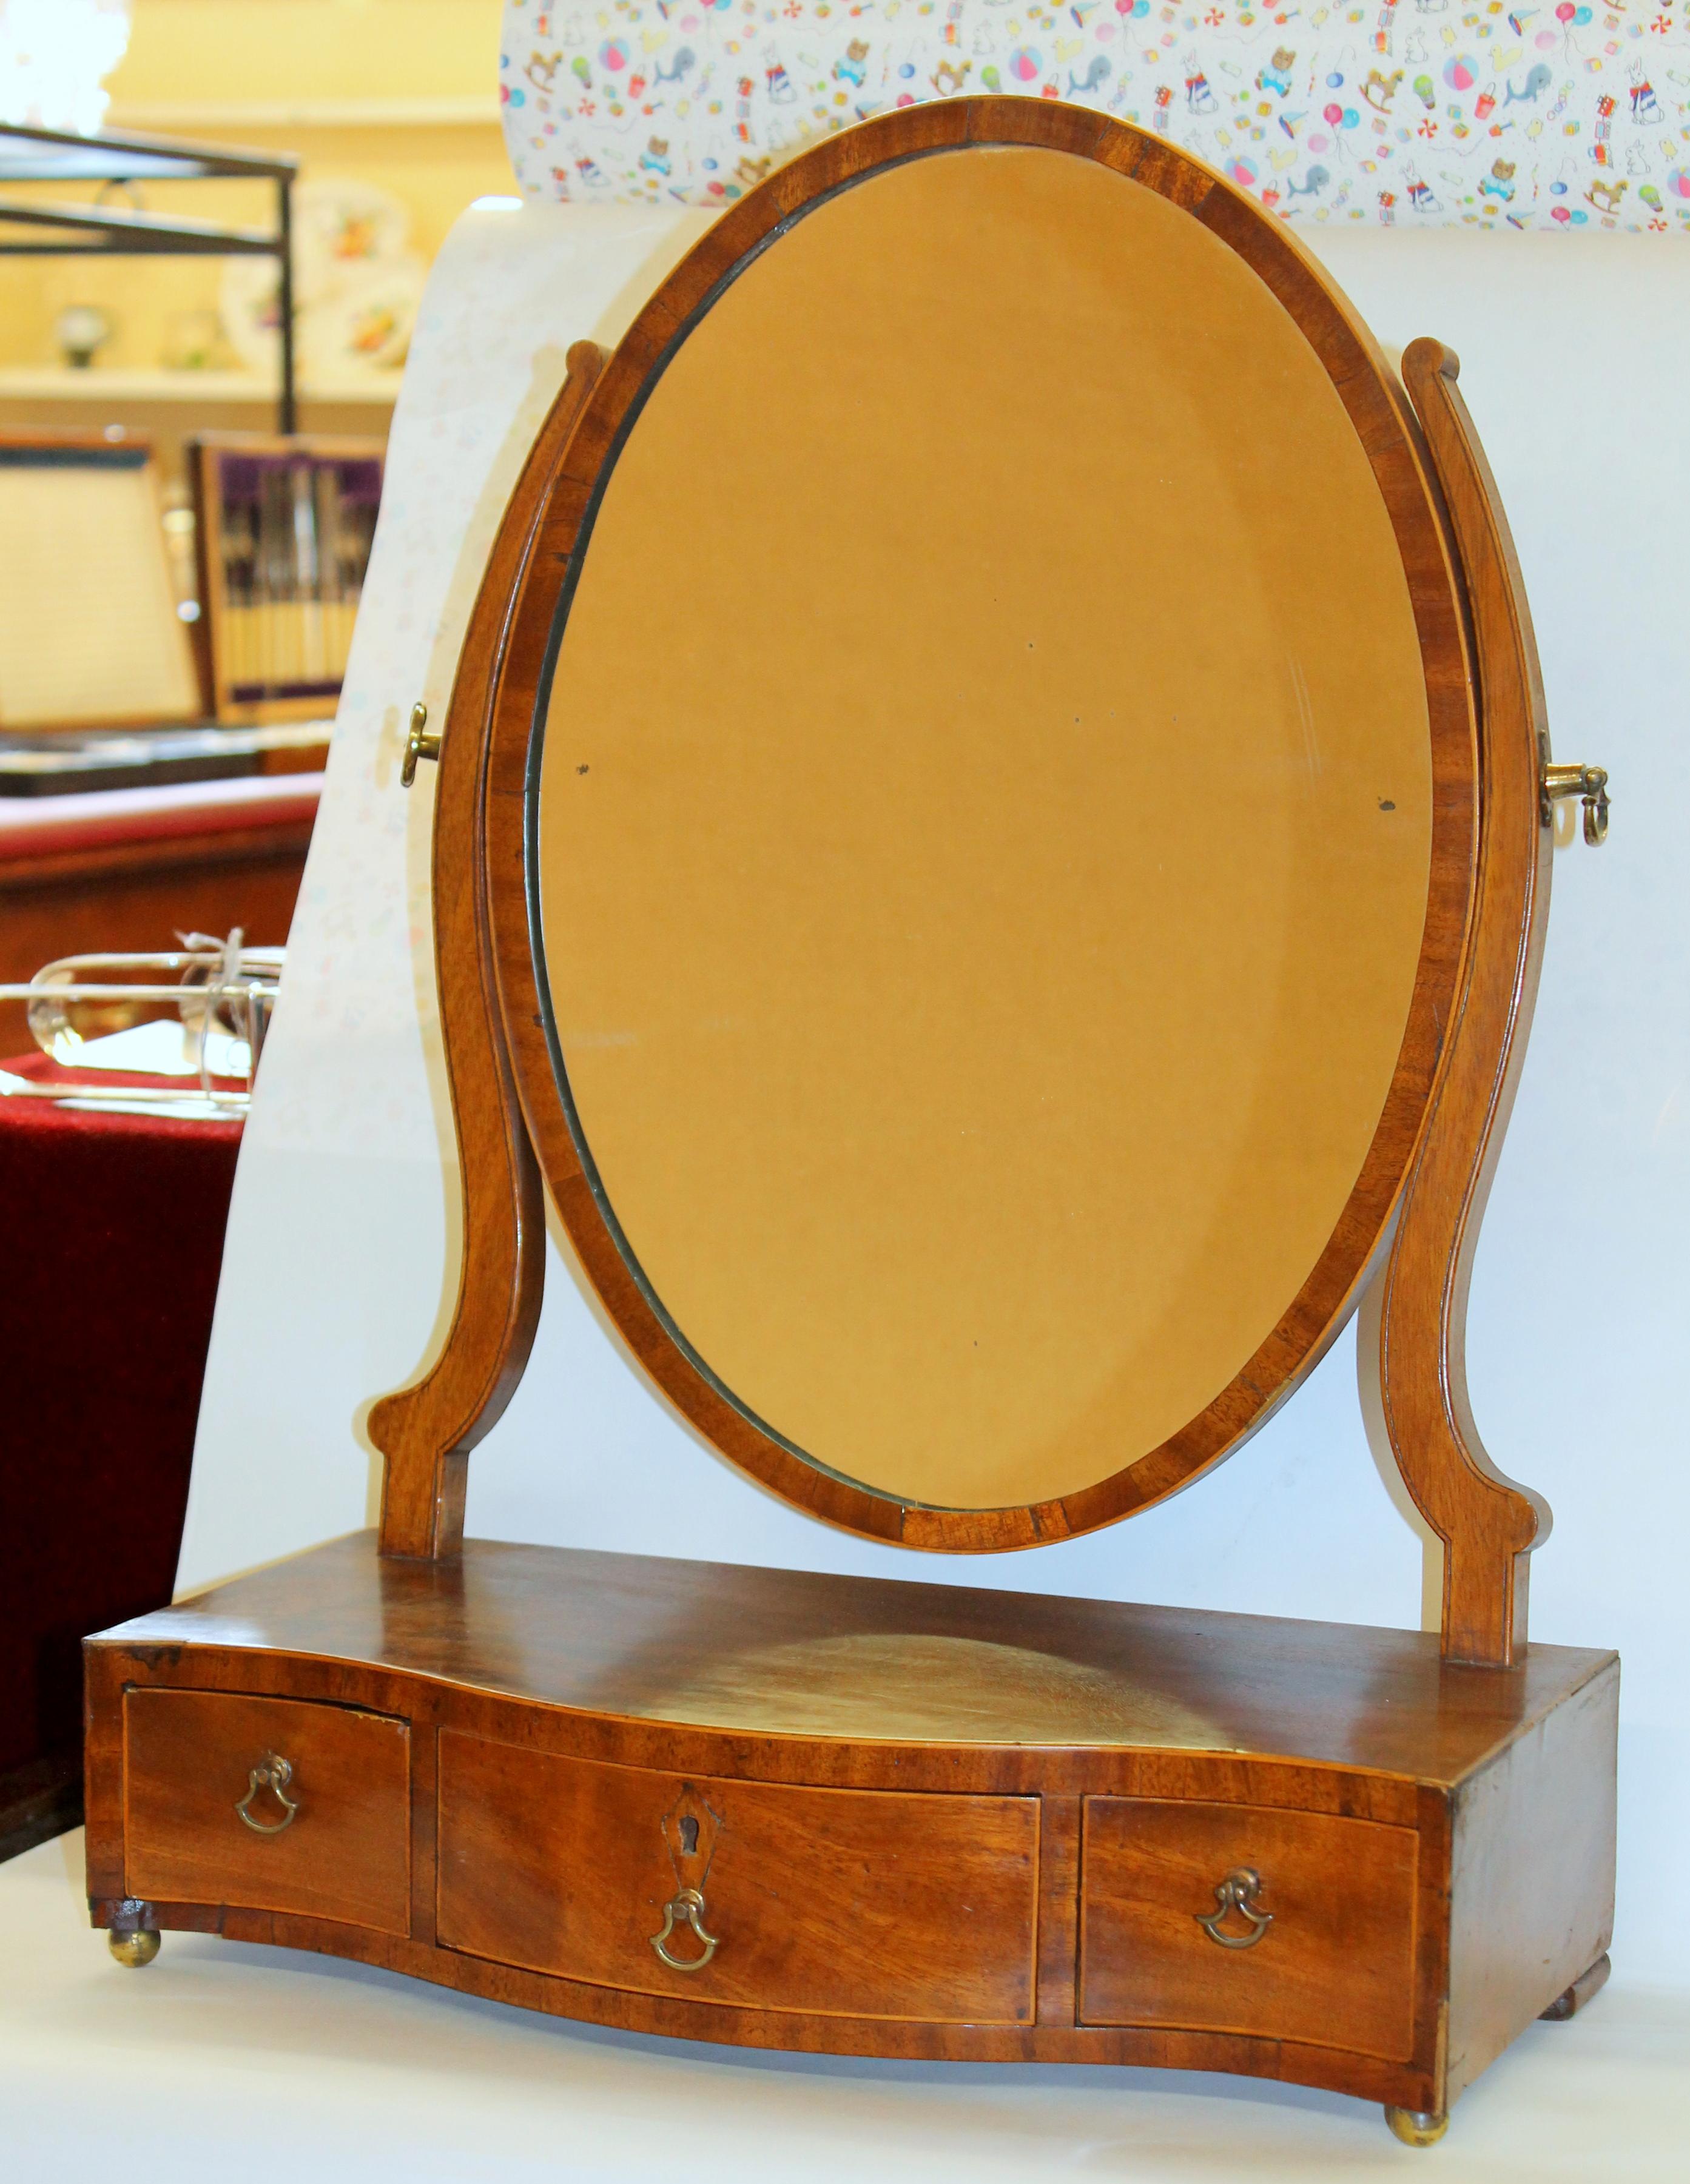 Very fine antique English Geo. III Mahogany shaving mirror with superb, rare serpentine shape, original oval mahogany frame adjustable mirror and original hardware. Please note the handsome highly figured 